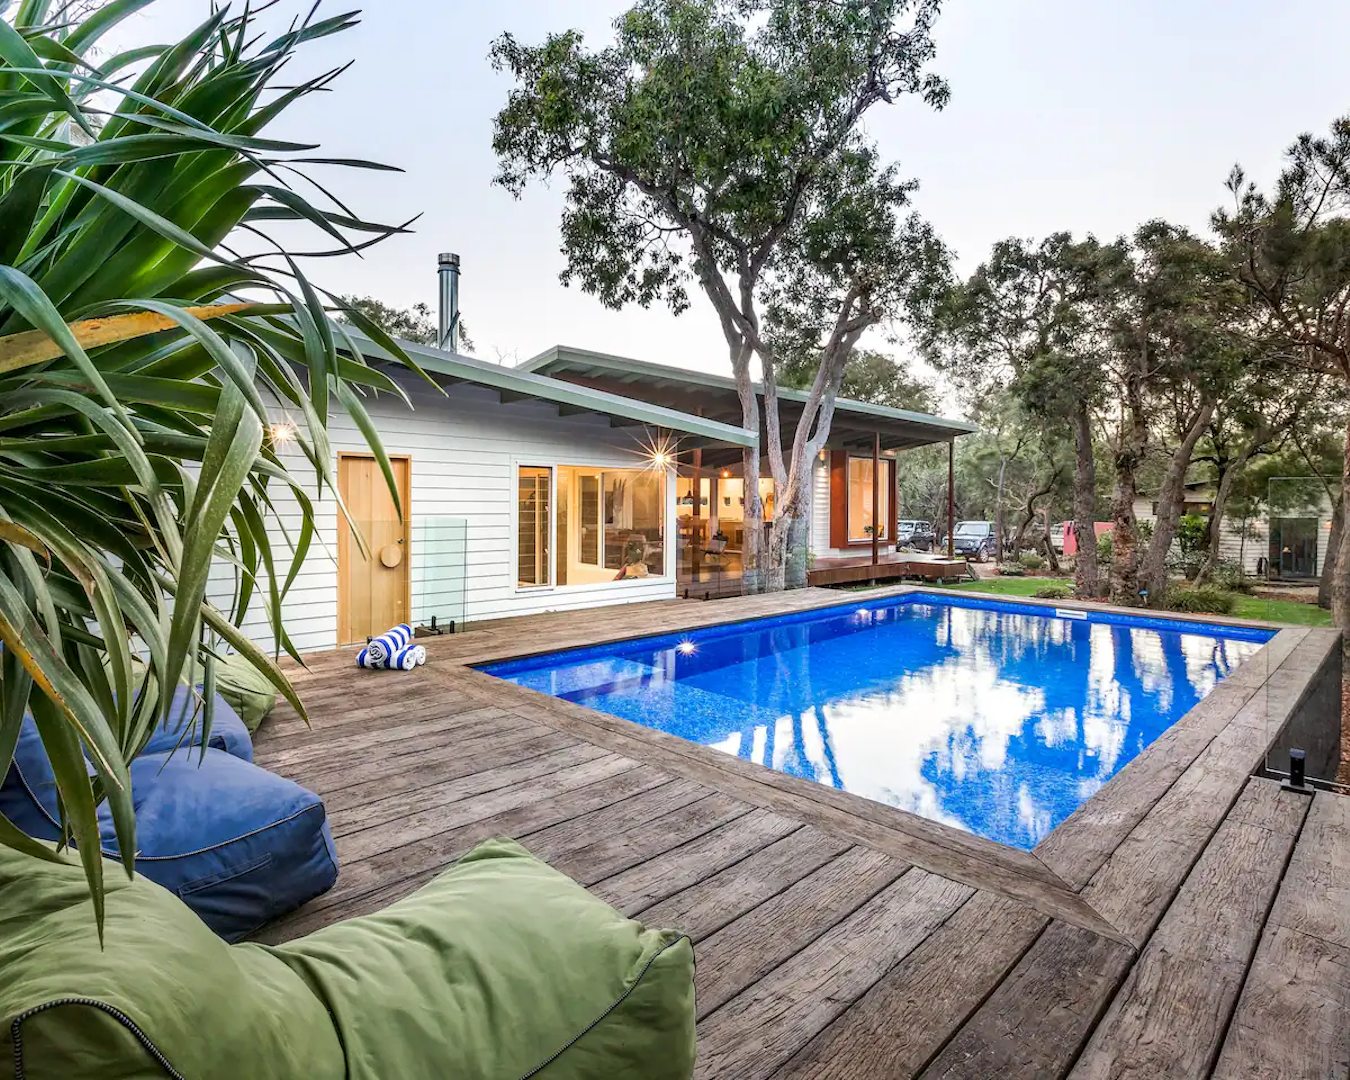 A family friendly Airbnb with pool in Yallingup